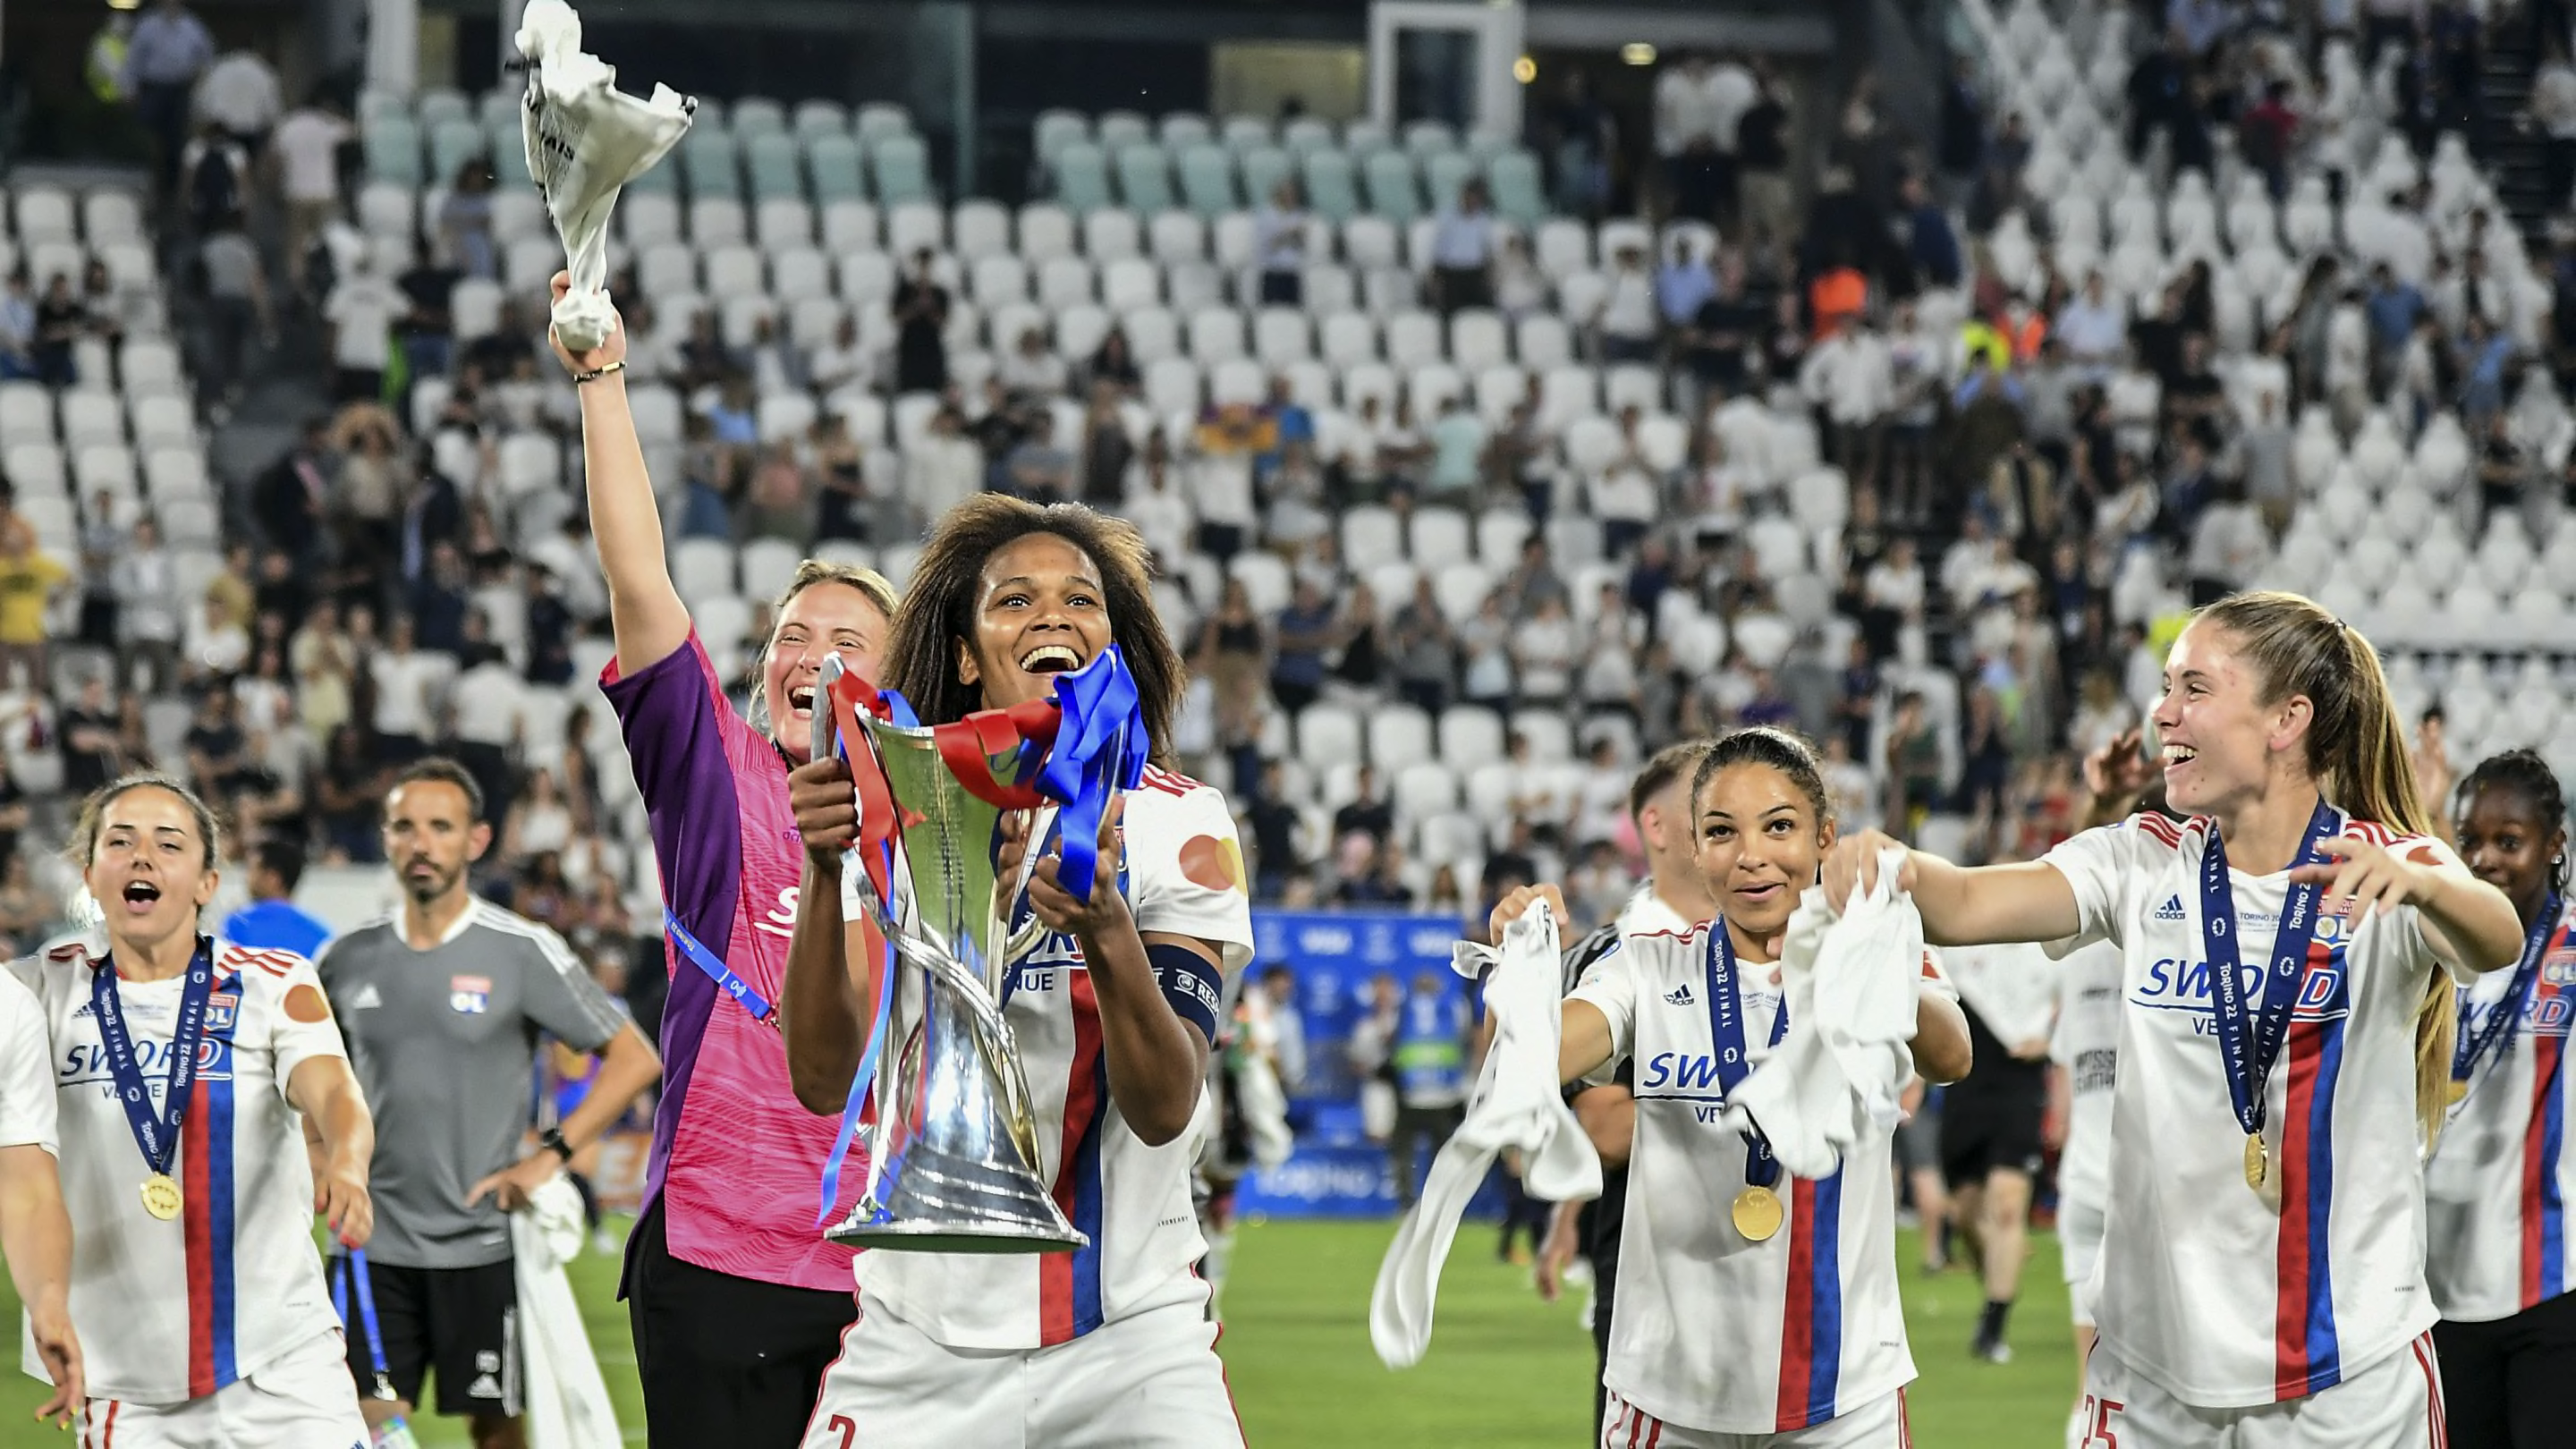 Women's Champions League 2022/23 group stage draw confirmed